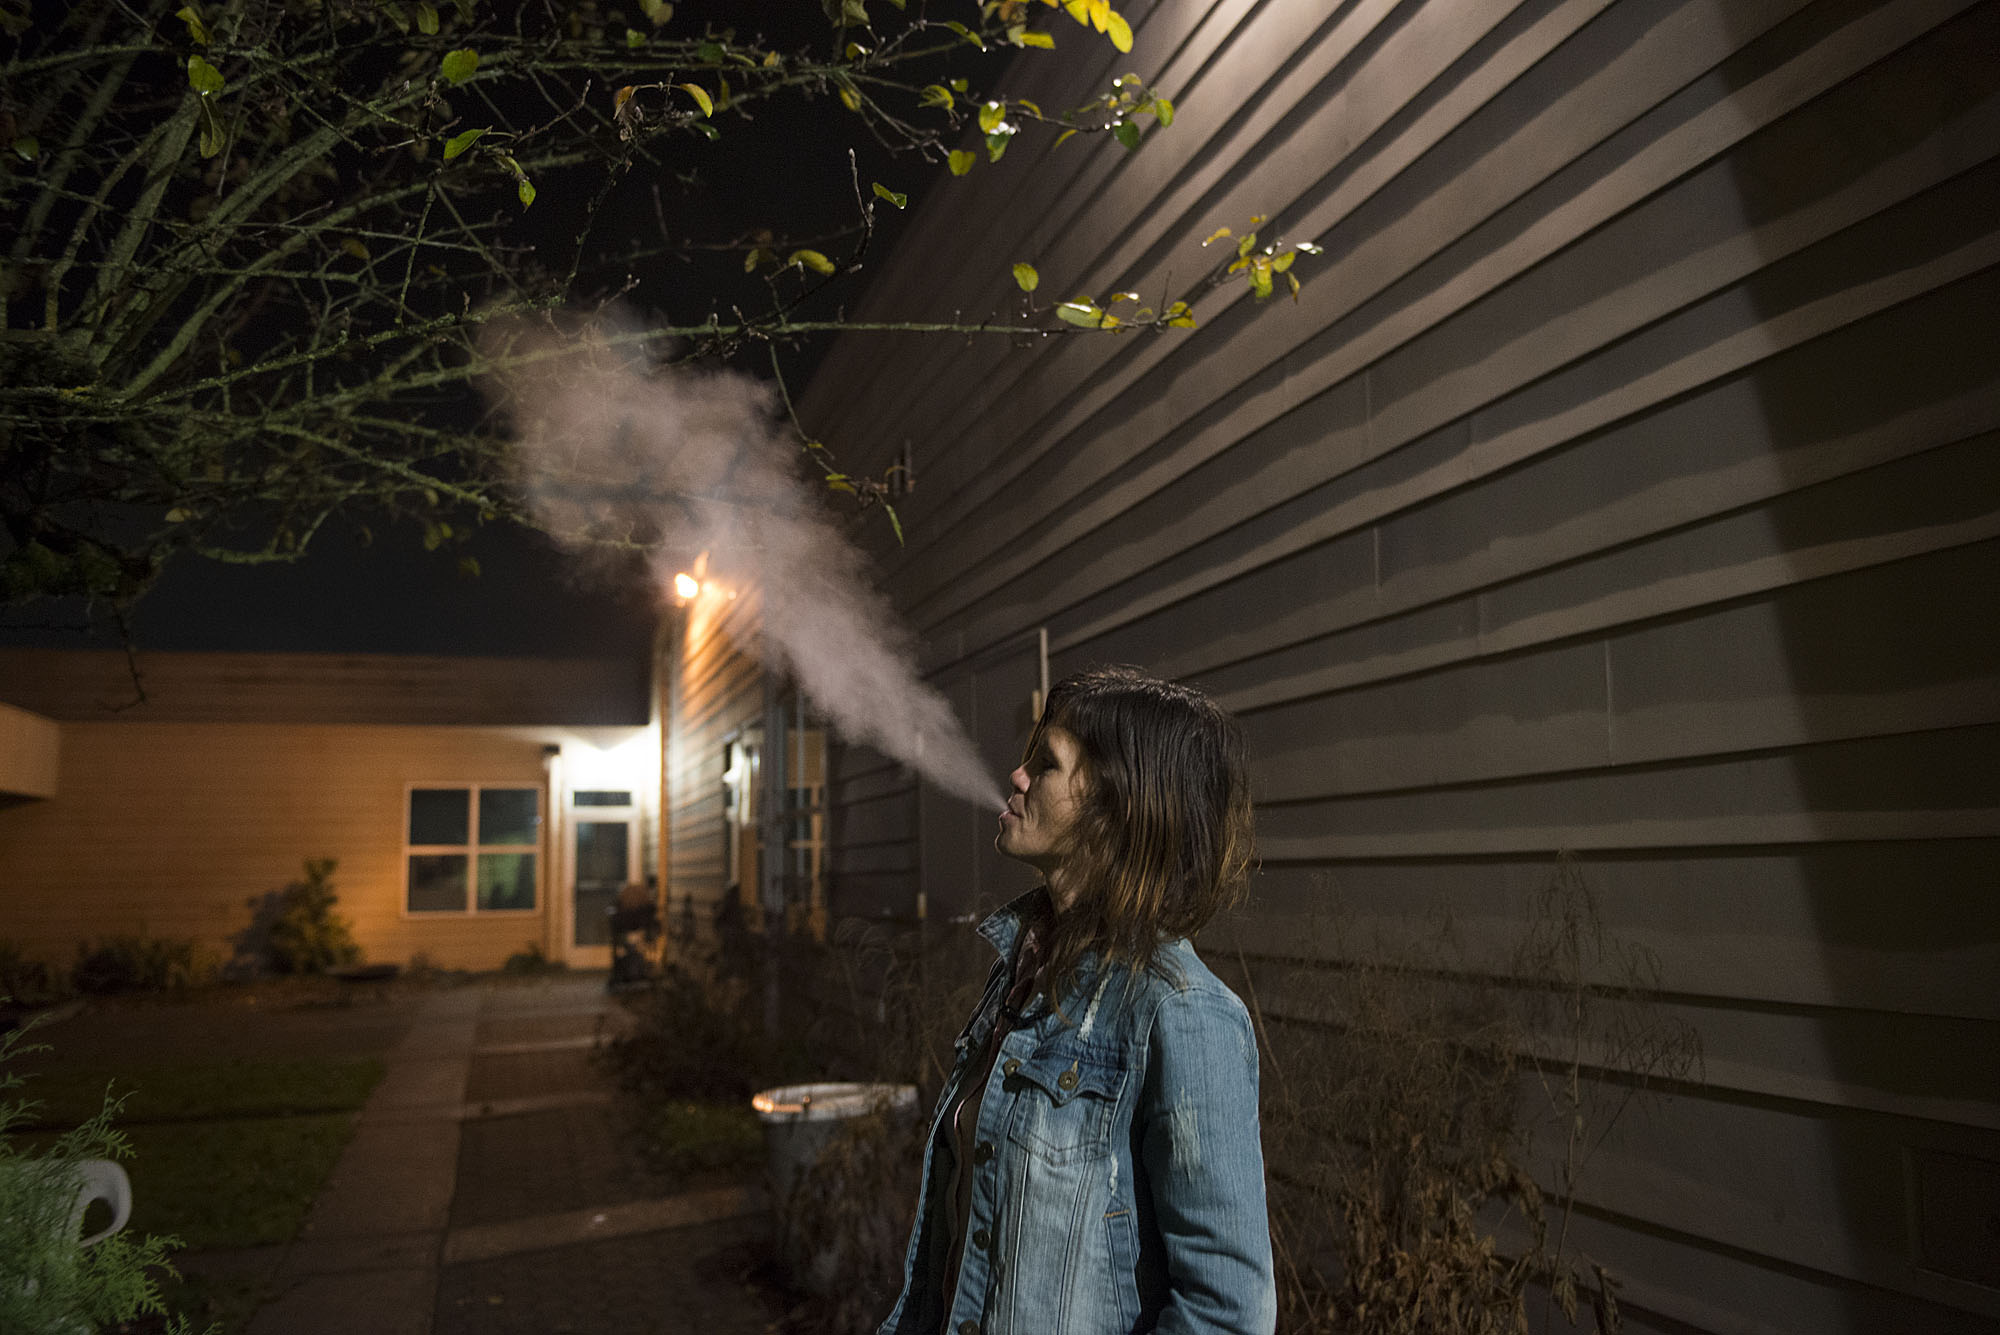 Donna Pinaula takes a few moments to herself to relax and smoke outside while her children shower Wednesday night, Dec. 2, 2015 at St. Andrew Lutheran Church. Although she has been smoking since she was a teenager, she said she tries not to smoke around her kids. (Amanda Cowan/The Columbian)